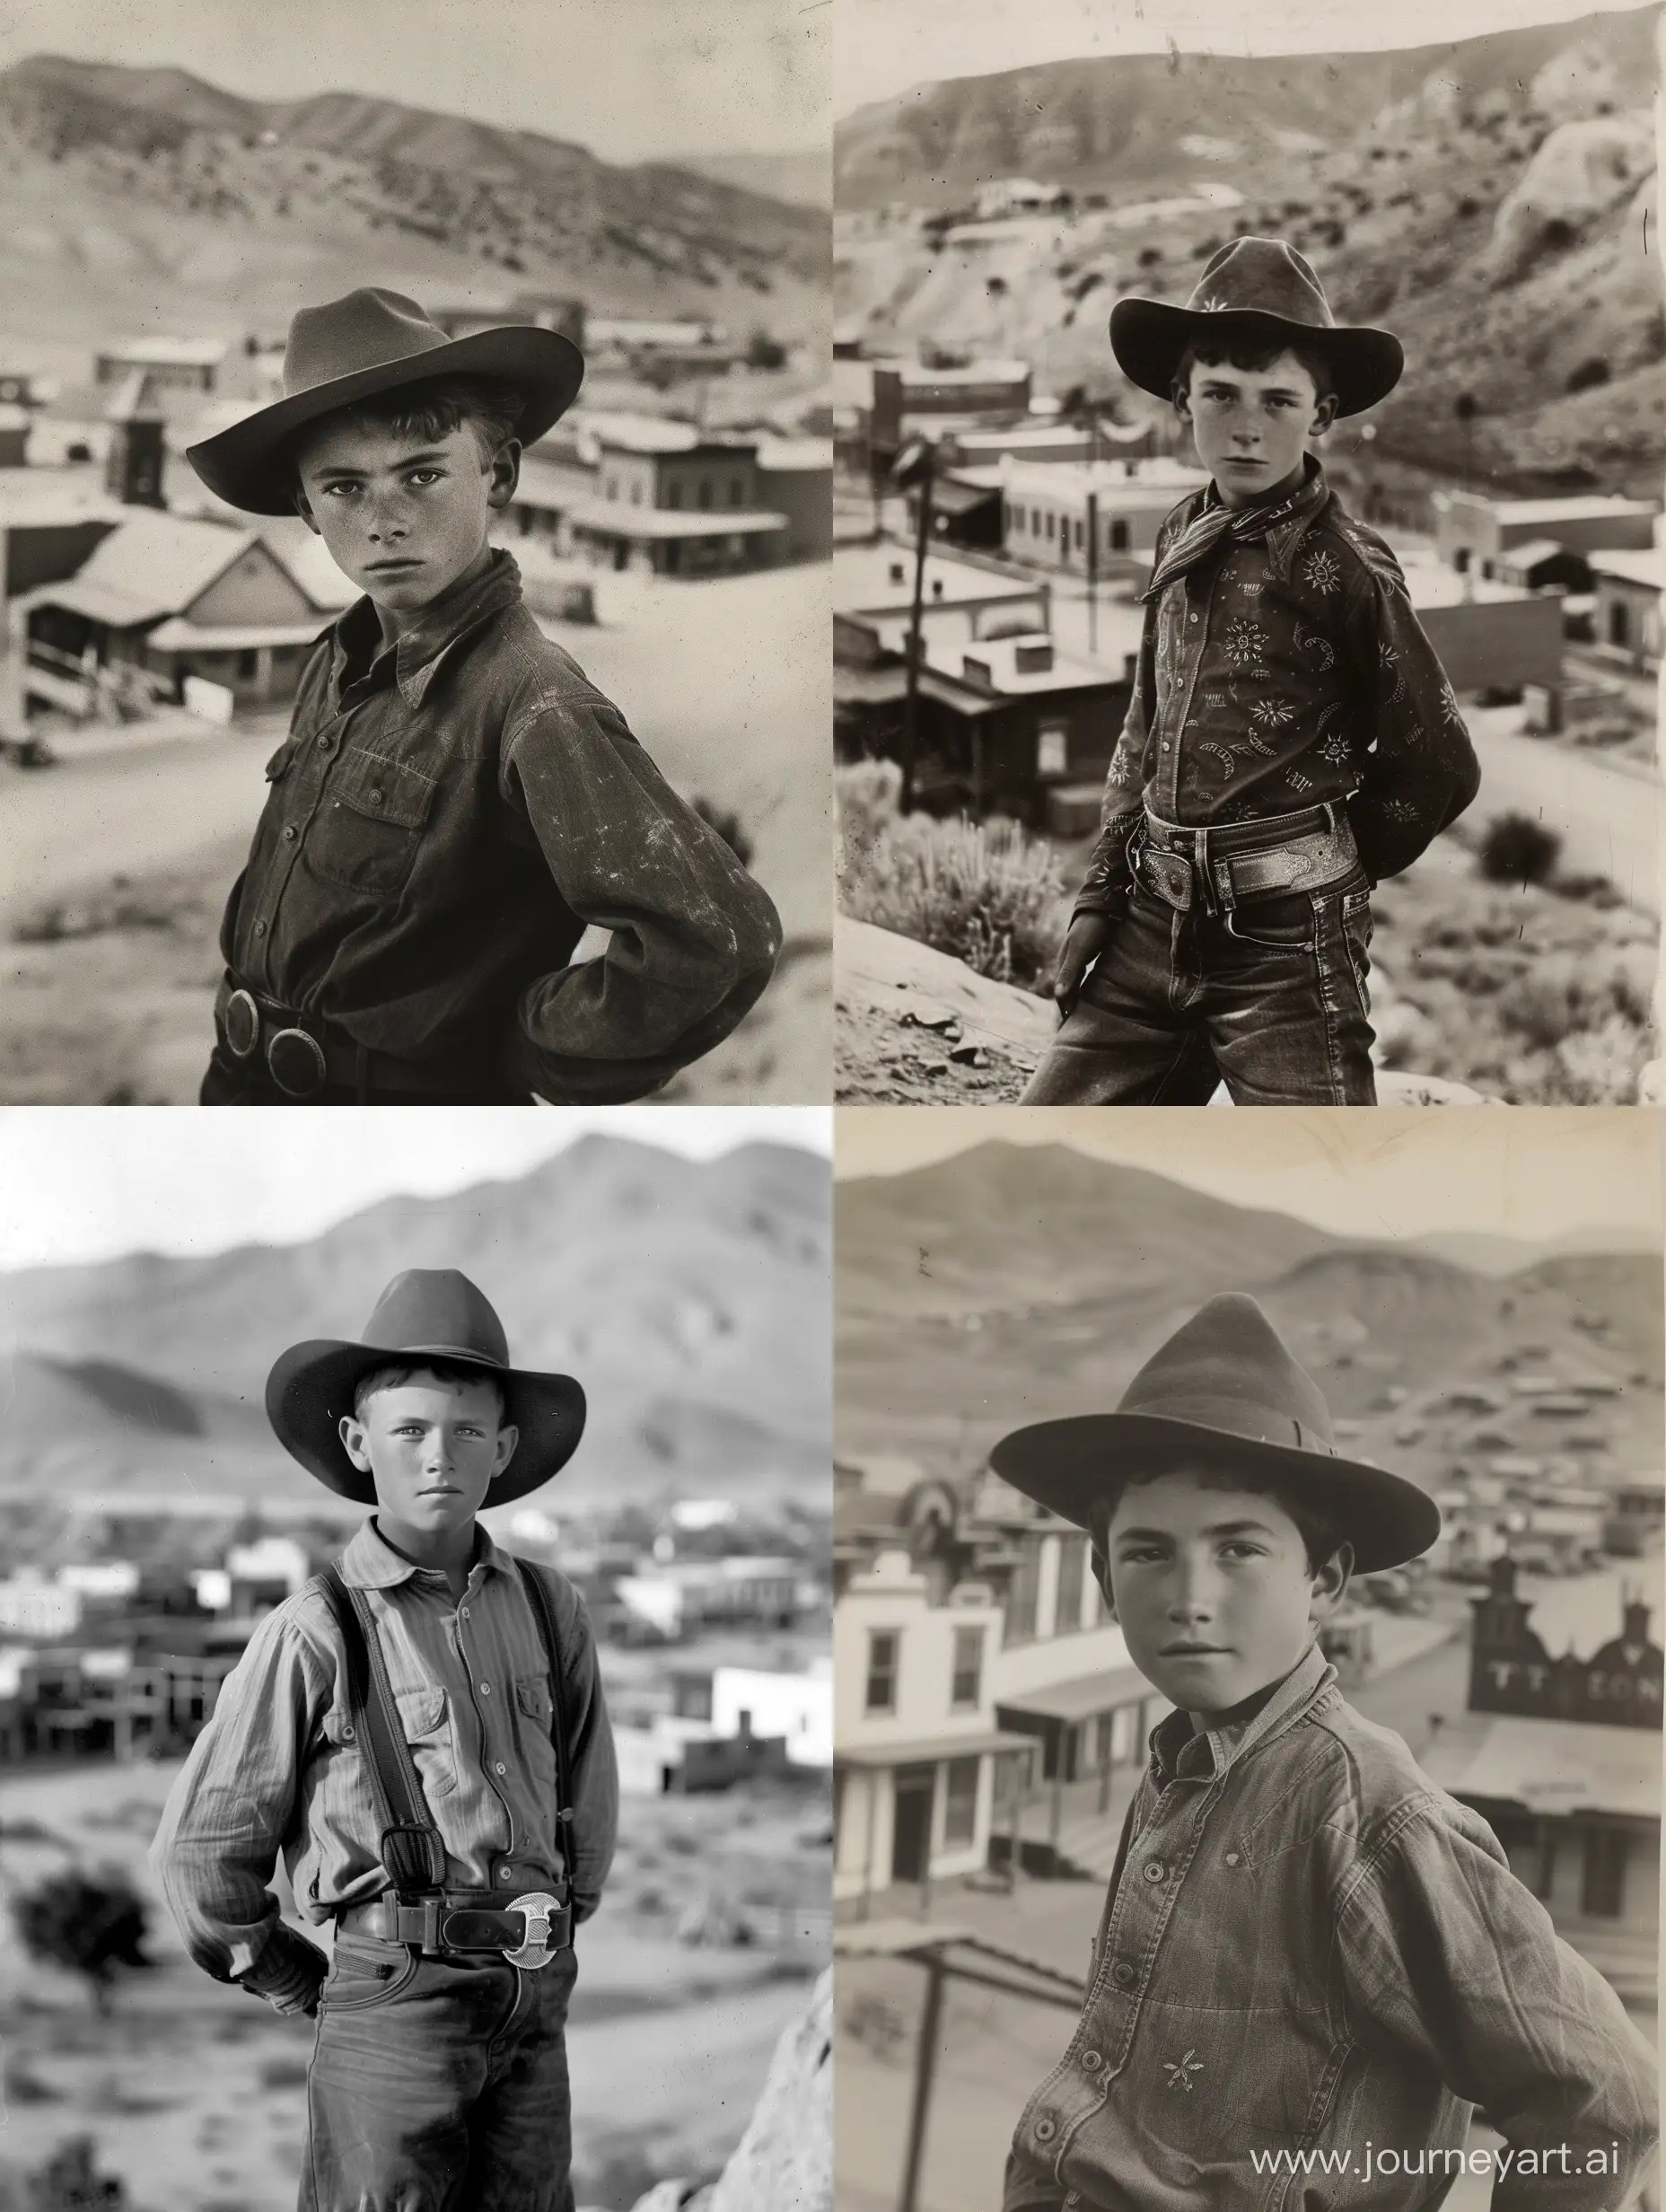 black and white photograph of a young cowboy posing in front of a town in the old west